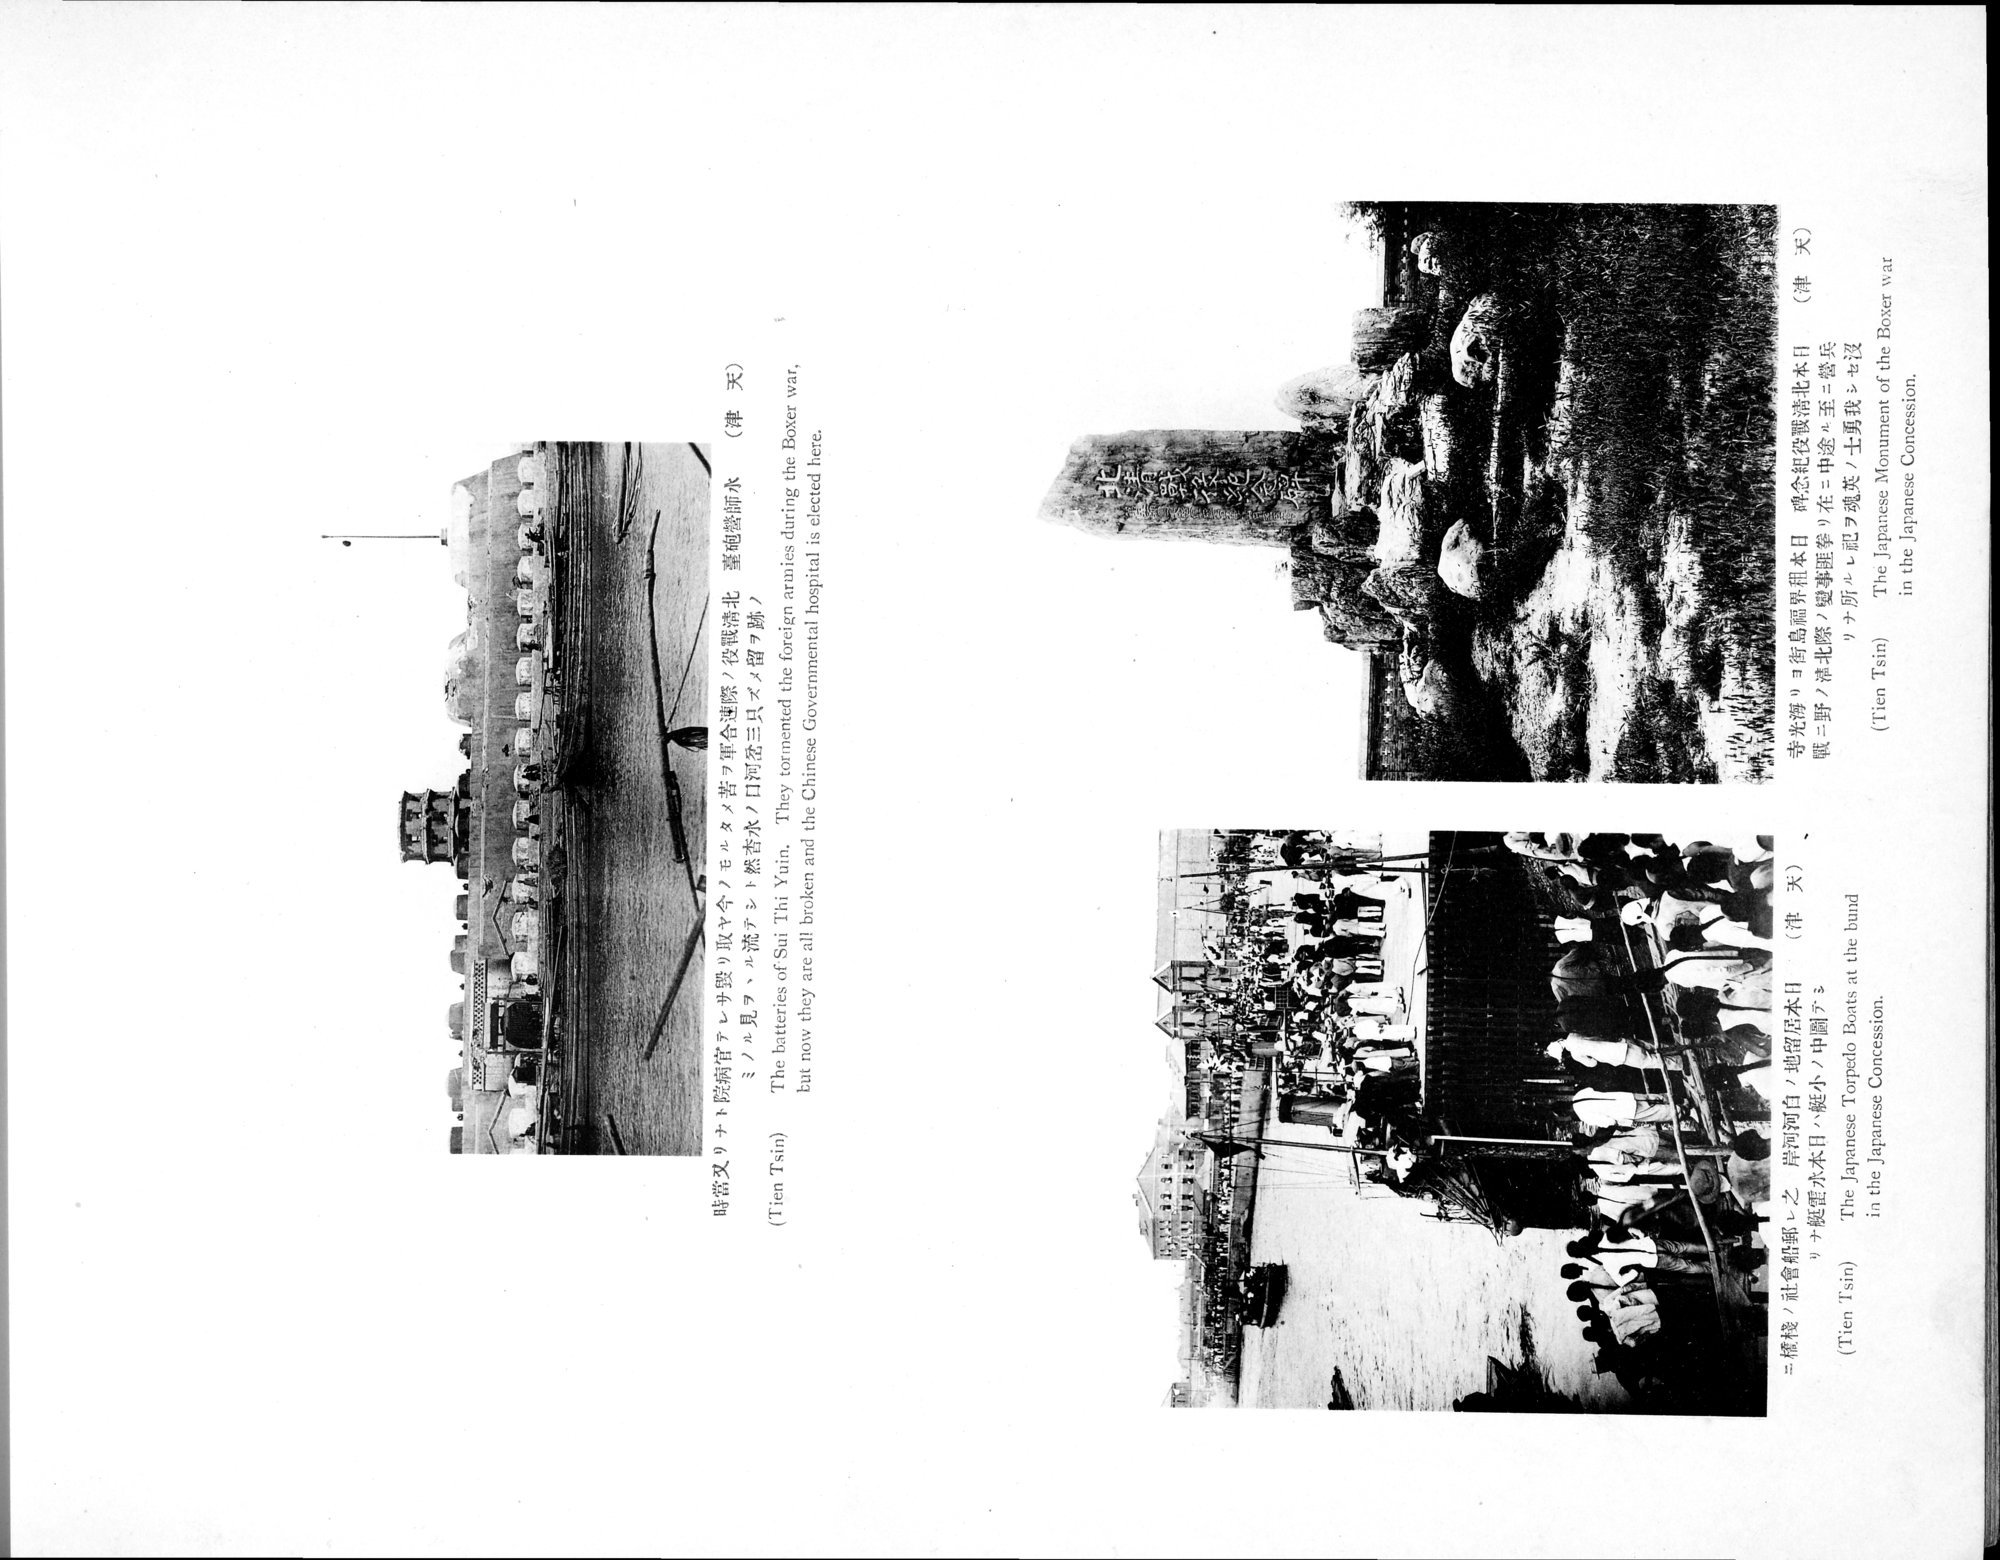 Views and Custom of North China : vol.1 / Page 49 (Grayscale High Resolution Image)